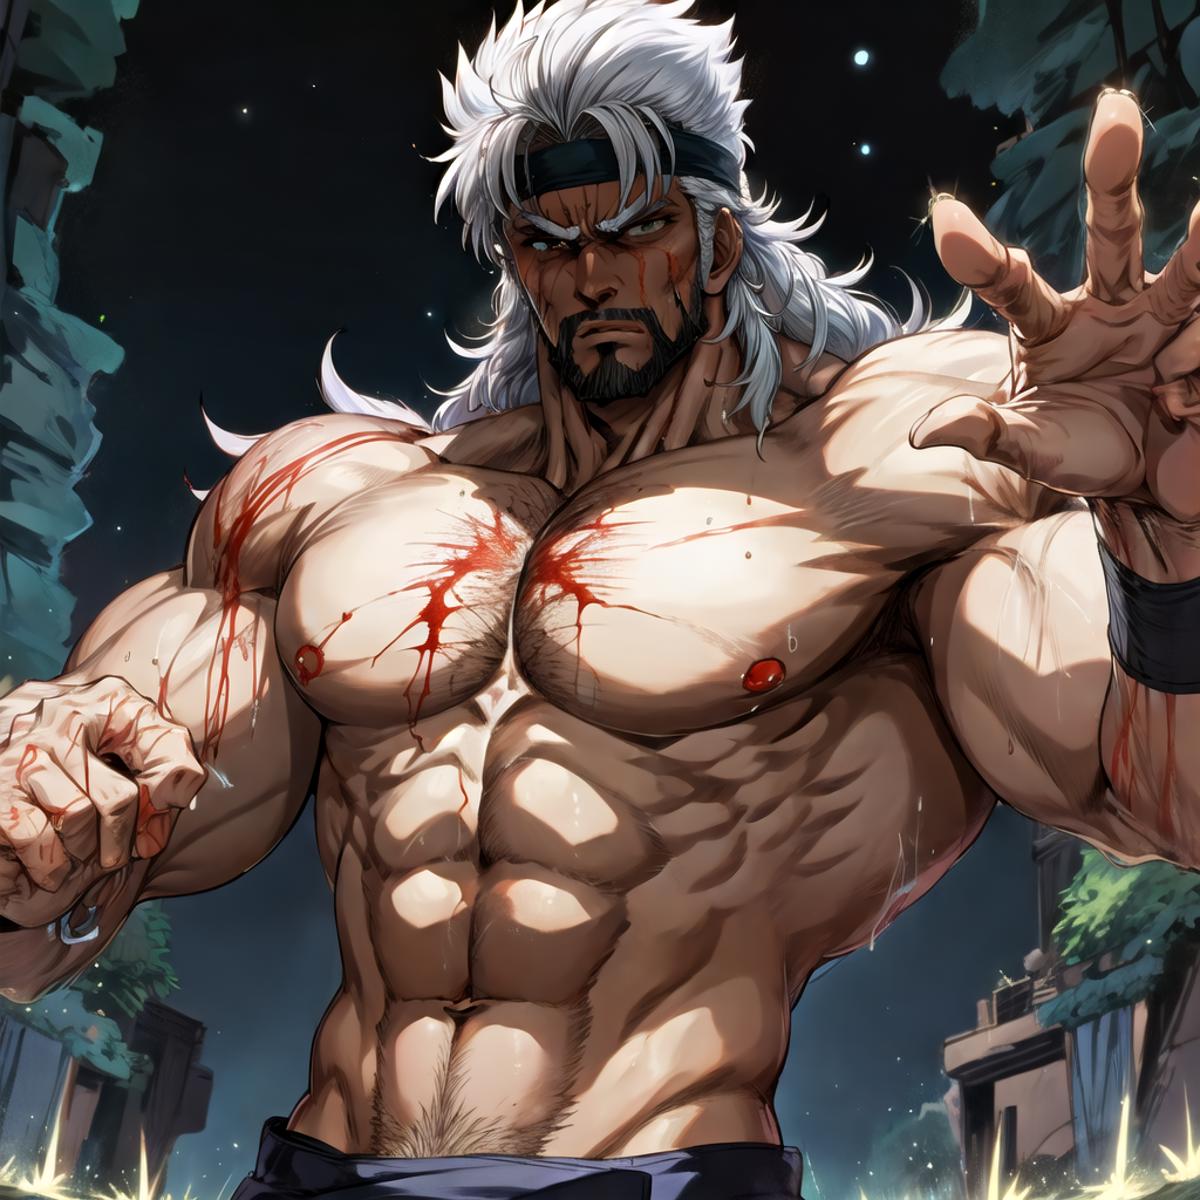 Fist Of The North Star / Hokuto No Ken Style image by pomu_zoo